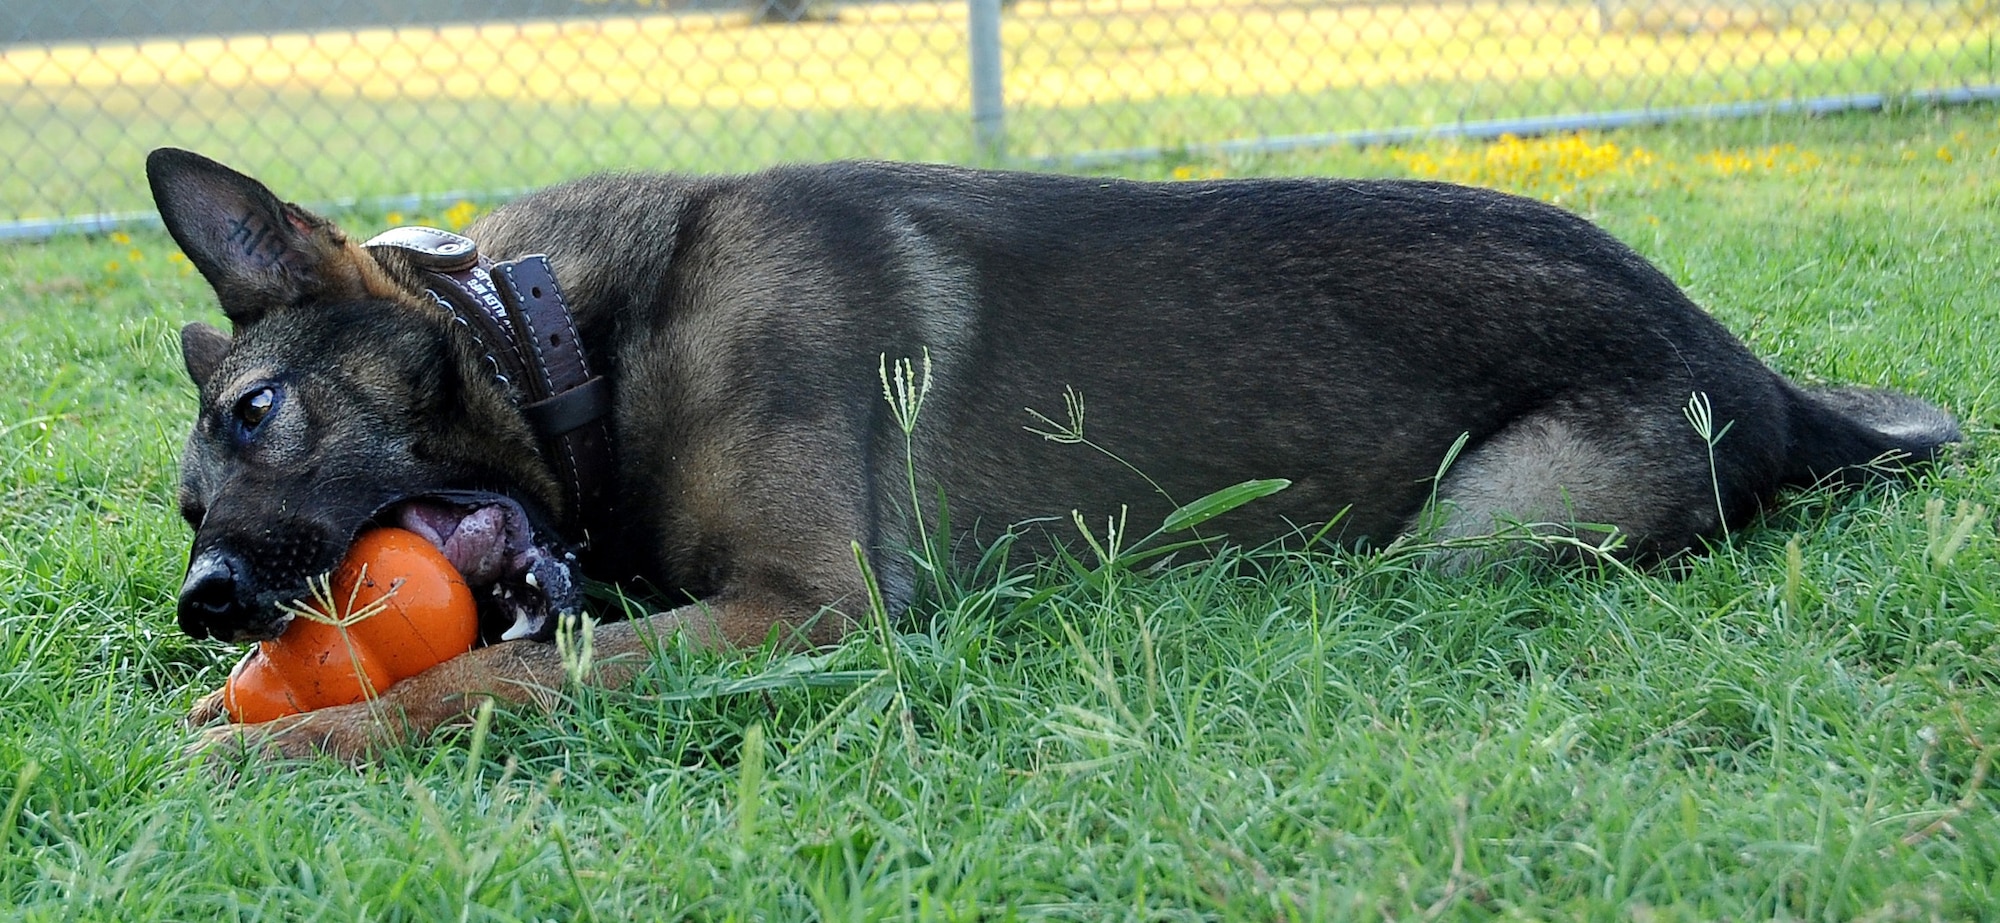 Rico, a 2nd Security Forces Squadron Military Working Dog, chews on one of his favorite toys during a break from training on Barksdale Air Force Base, La., Aug. 24. Rico, a two-year old German Shepherd, is being trained for a deployment overseas. The training consists of practical scenarios including road way sweeps, massive open area sweeps, cache and improvised explosive device sweeps and counter insurgent patrols. (U.S. Air Force photo/Senior Airman Amber Ashcraft) (RELEASED)